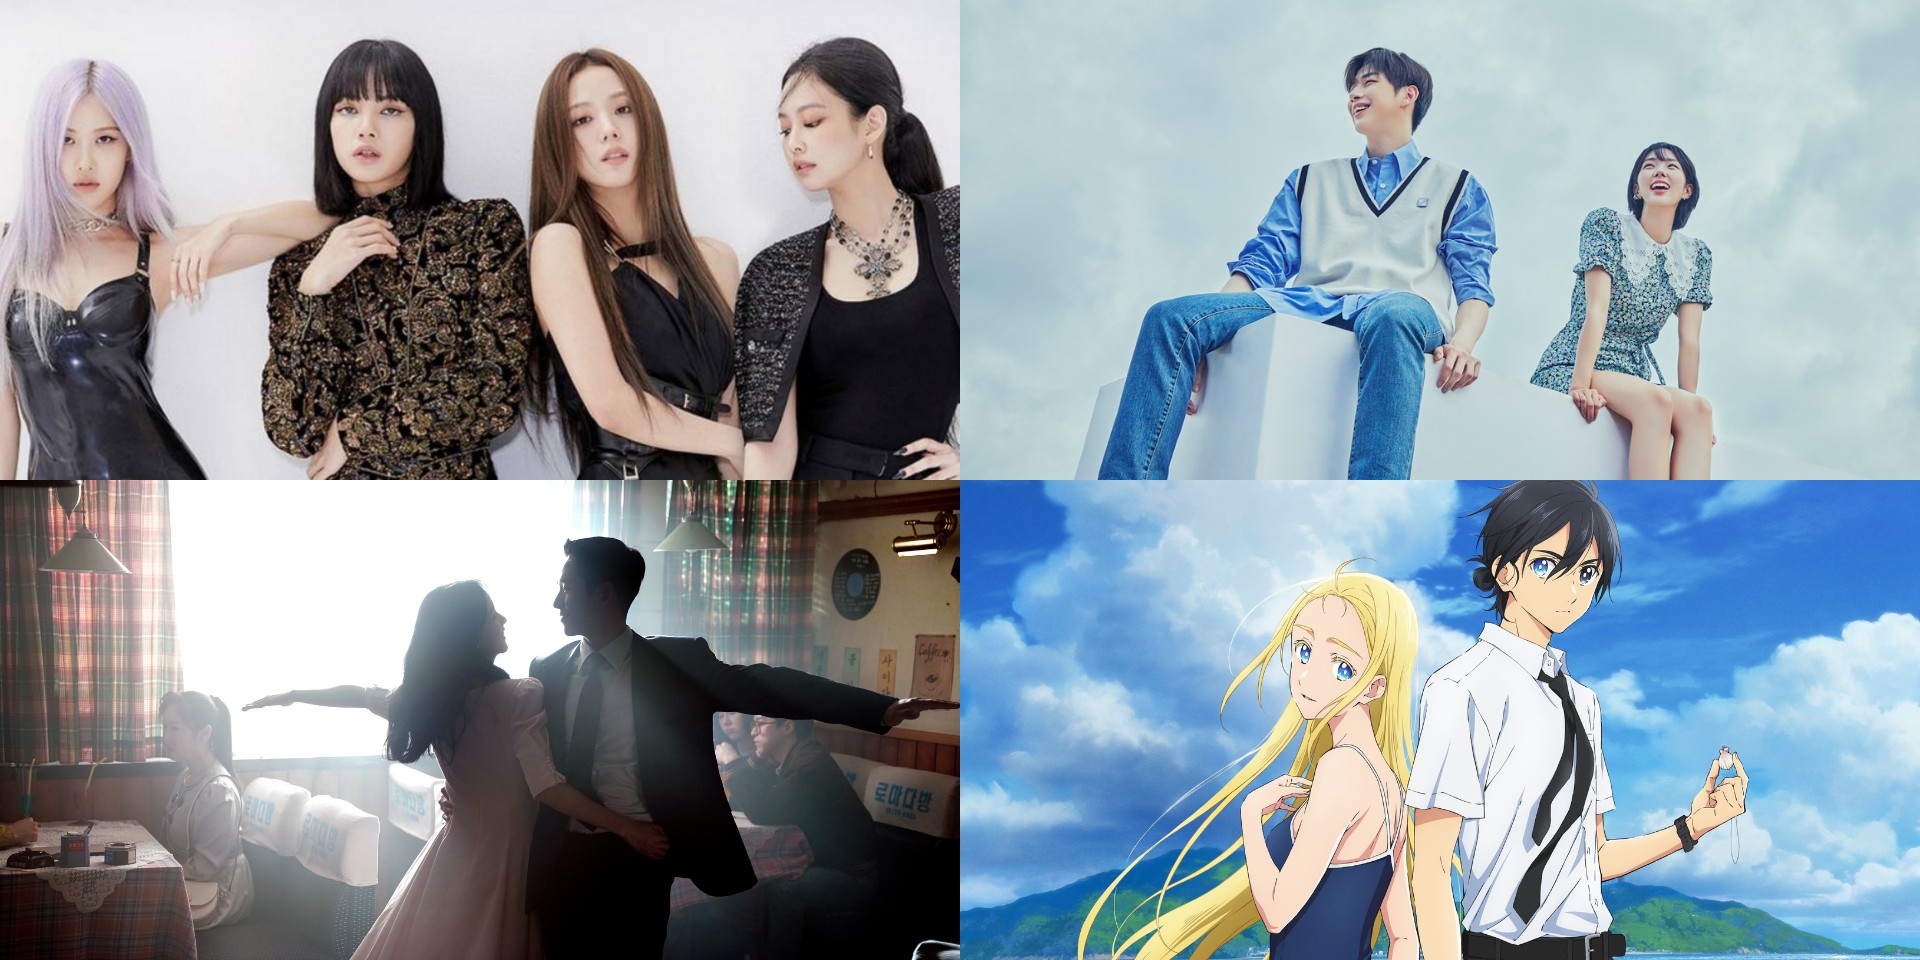 Disney+ unveils upcoming Asia Pacific titles: BLACKPINK: The Movie, Snowdrop, Rookies, and more